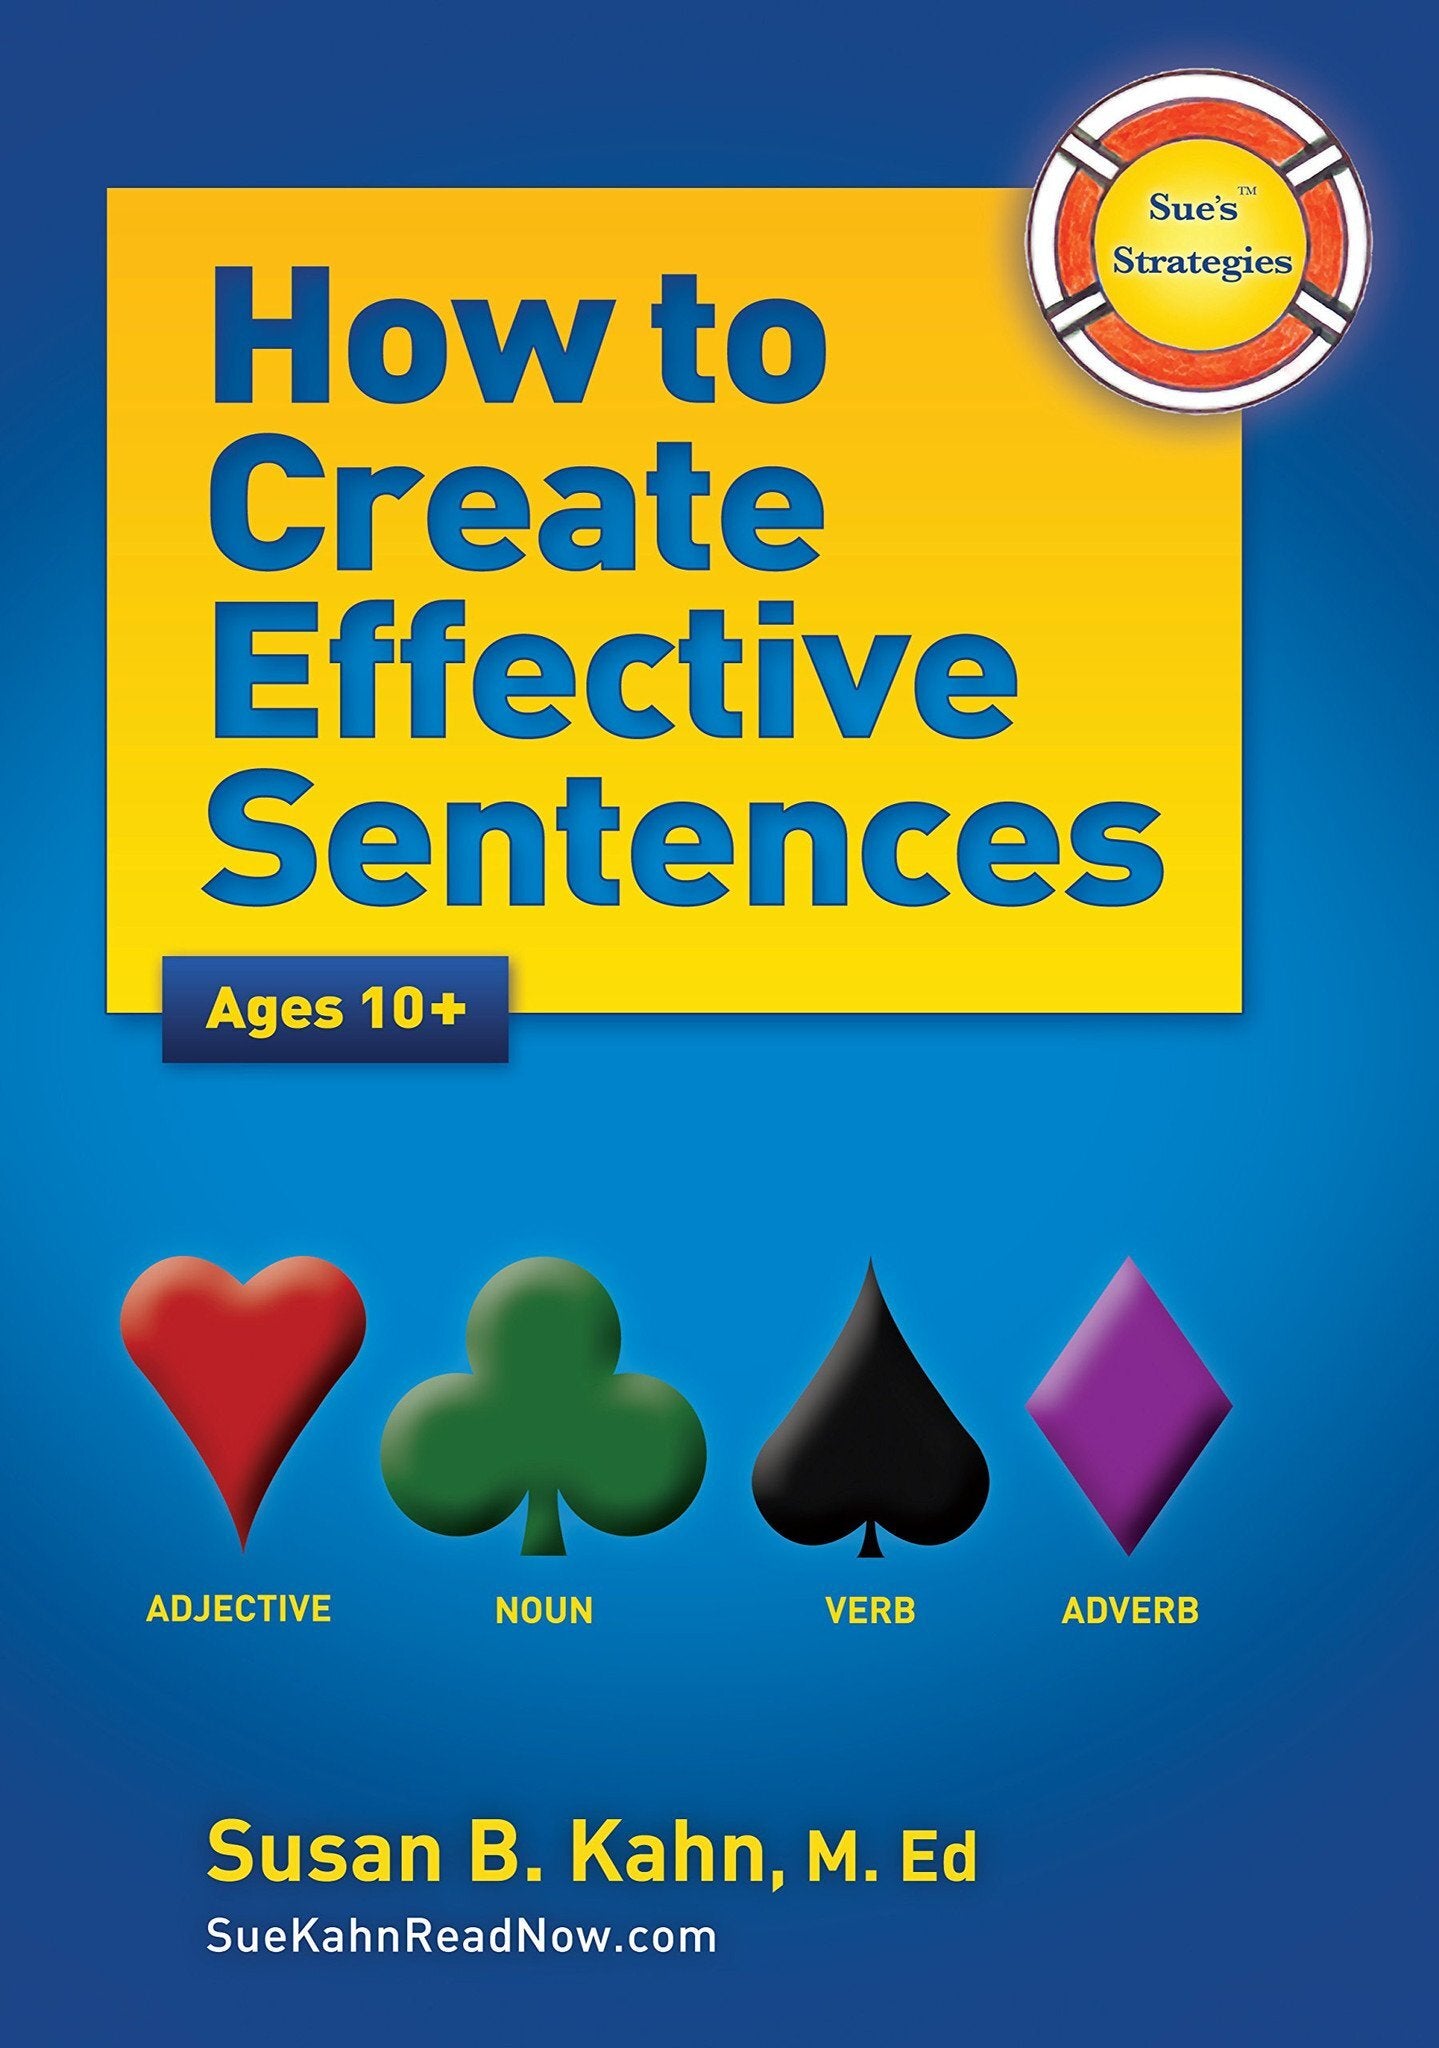 Sue's Strategies: How to Create Effective Sentences Ages 10+ 